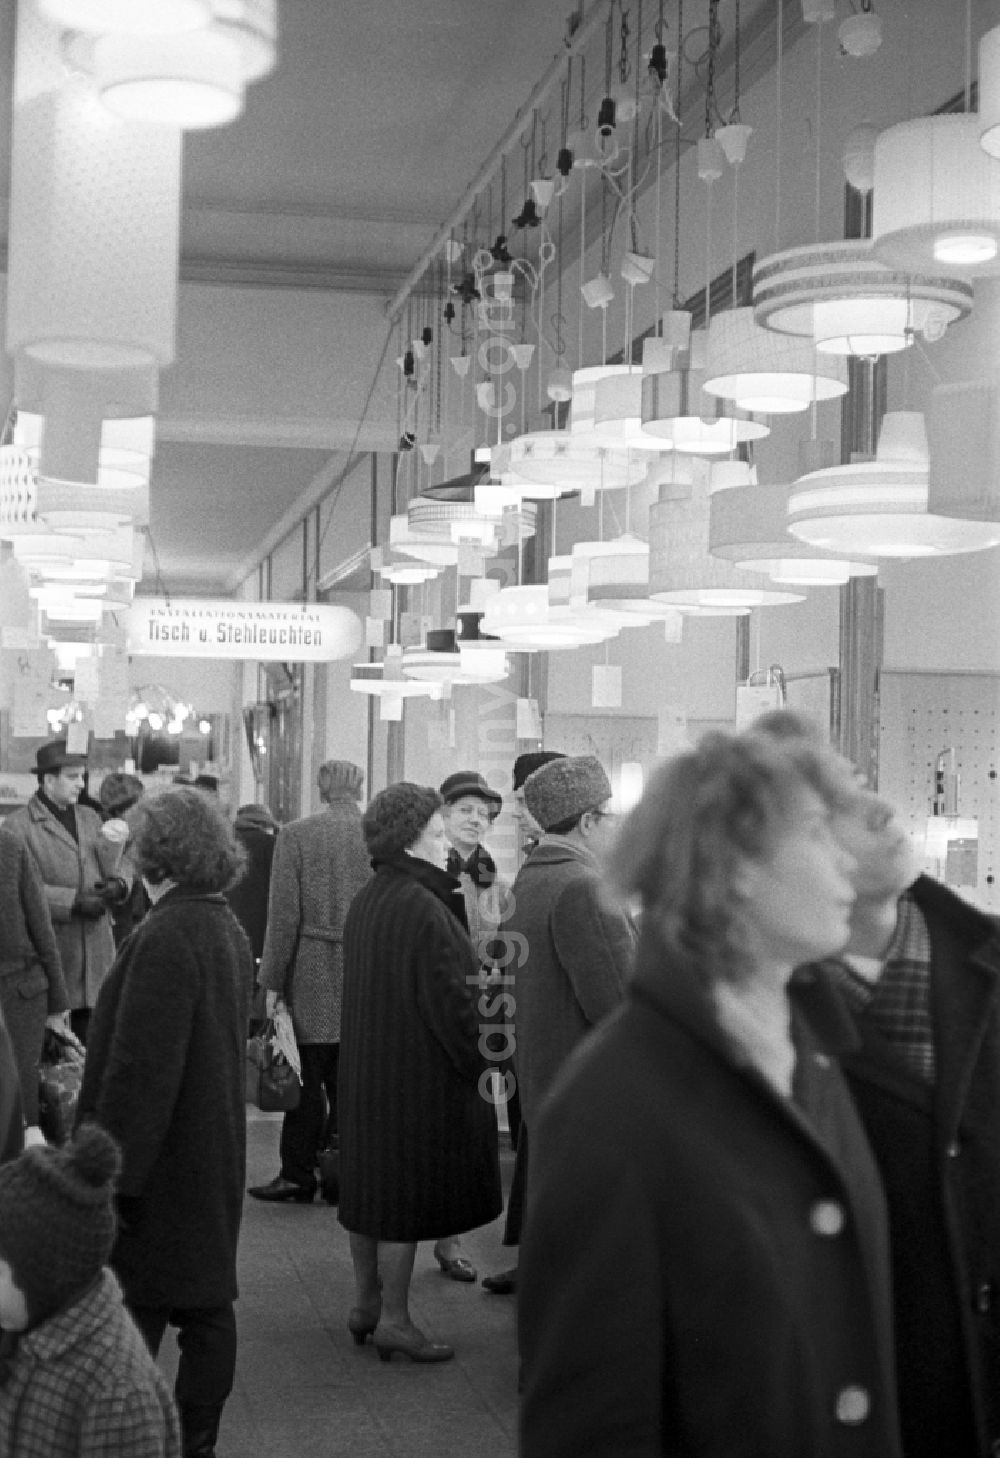 Magdeburg: Customers in the department store in the lighting department in Magdeburg